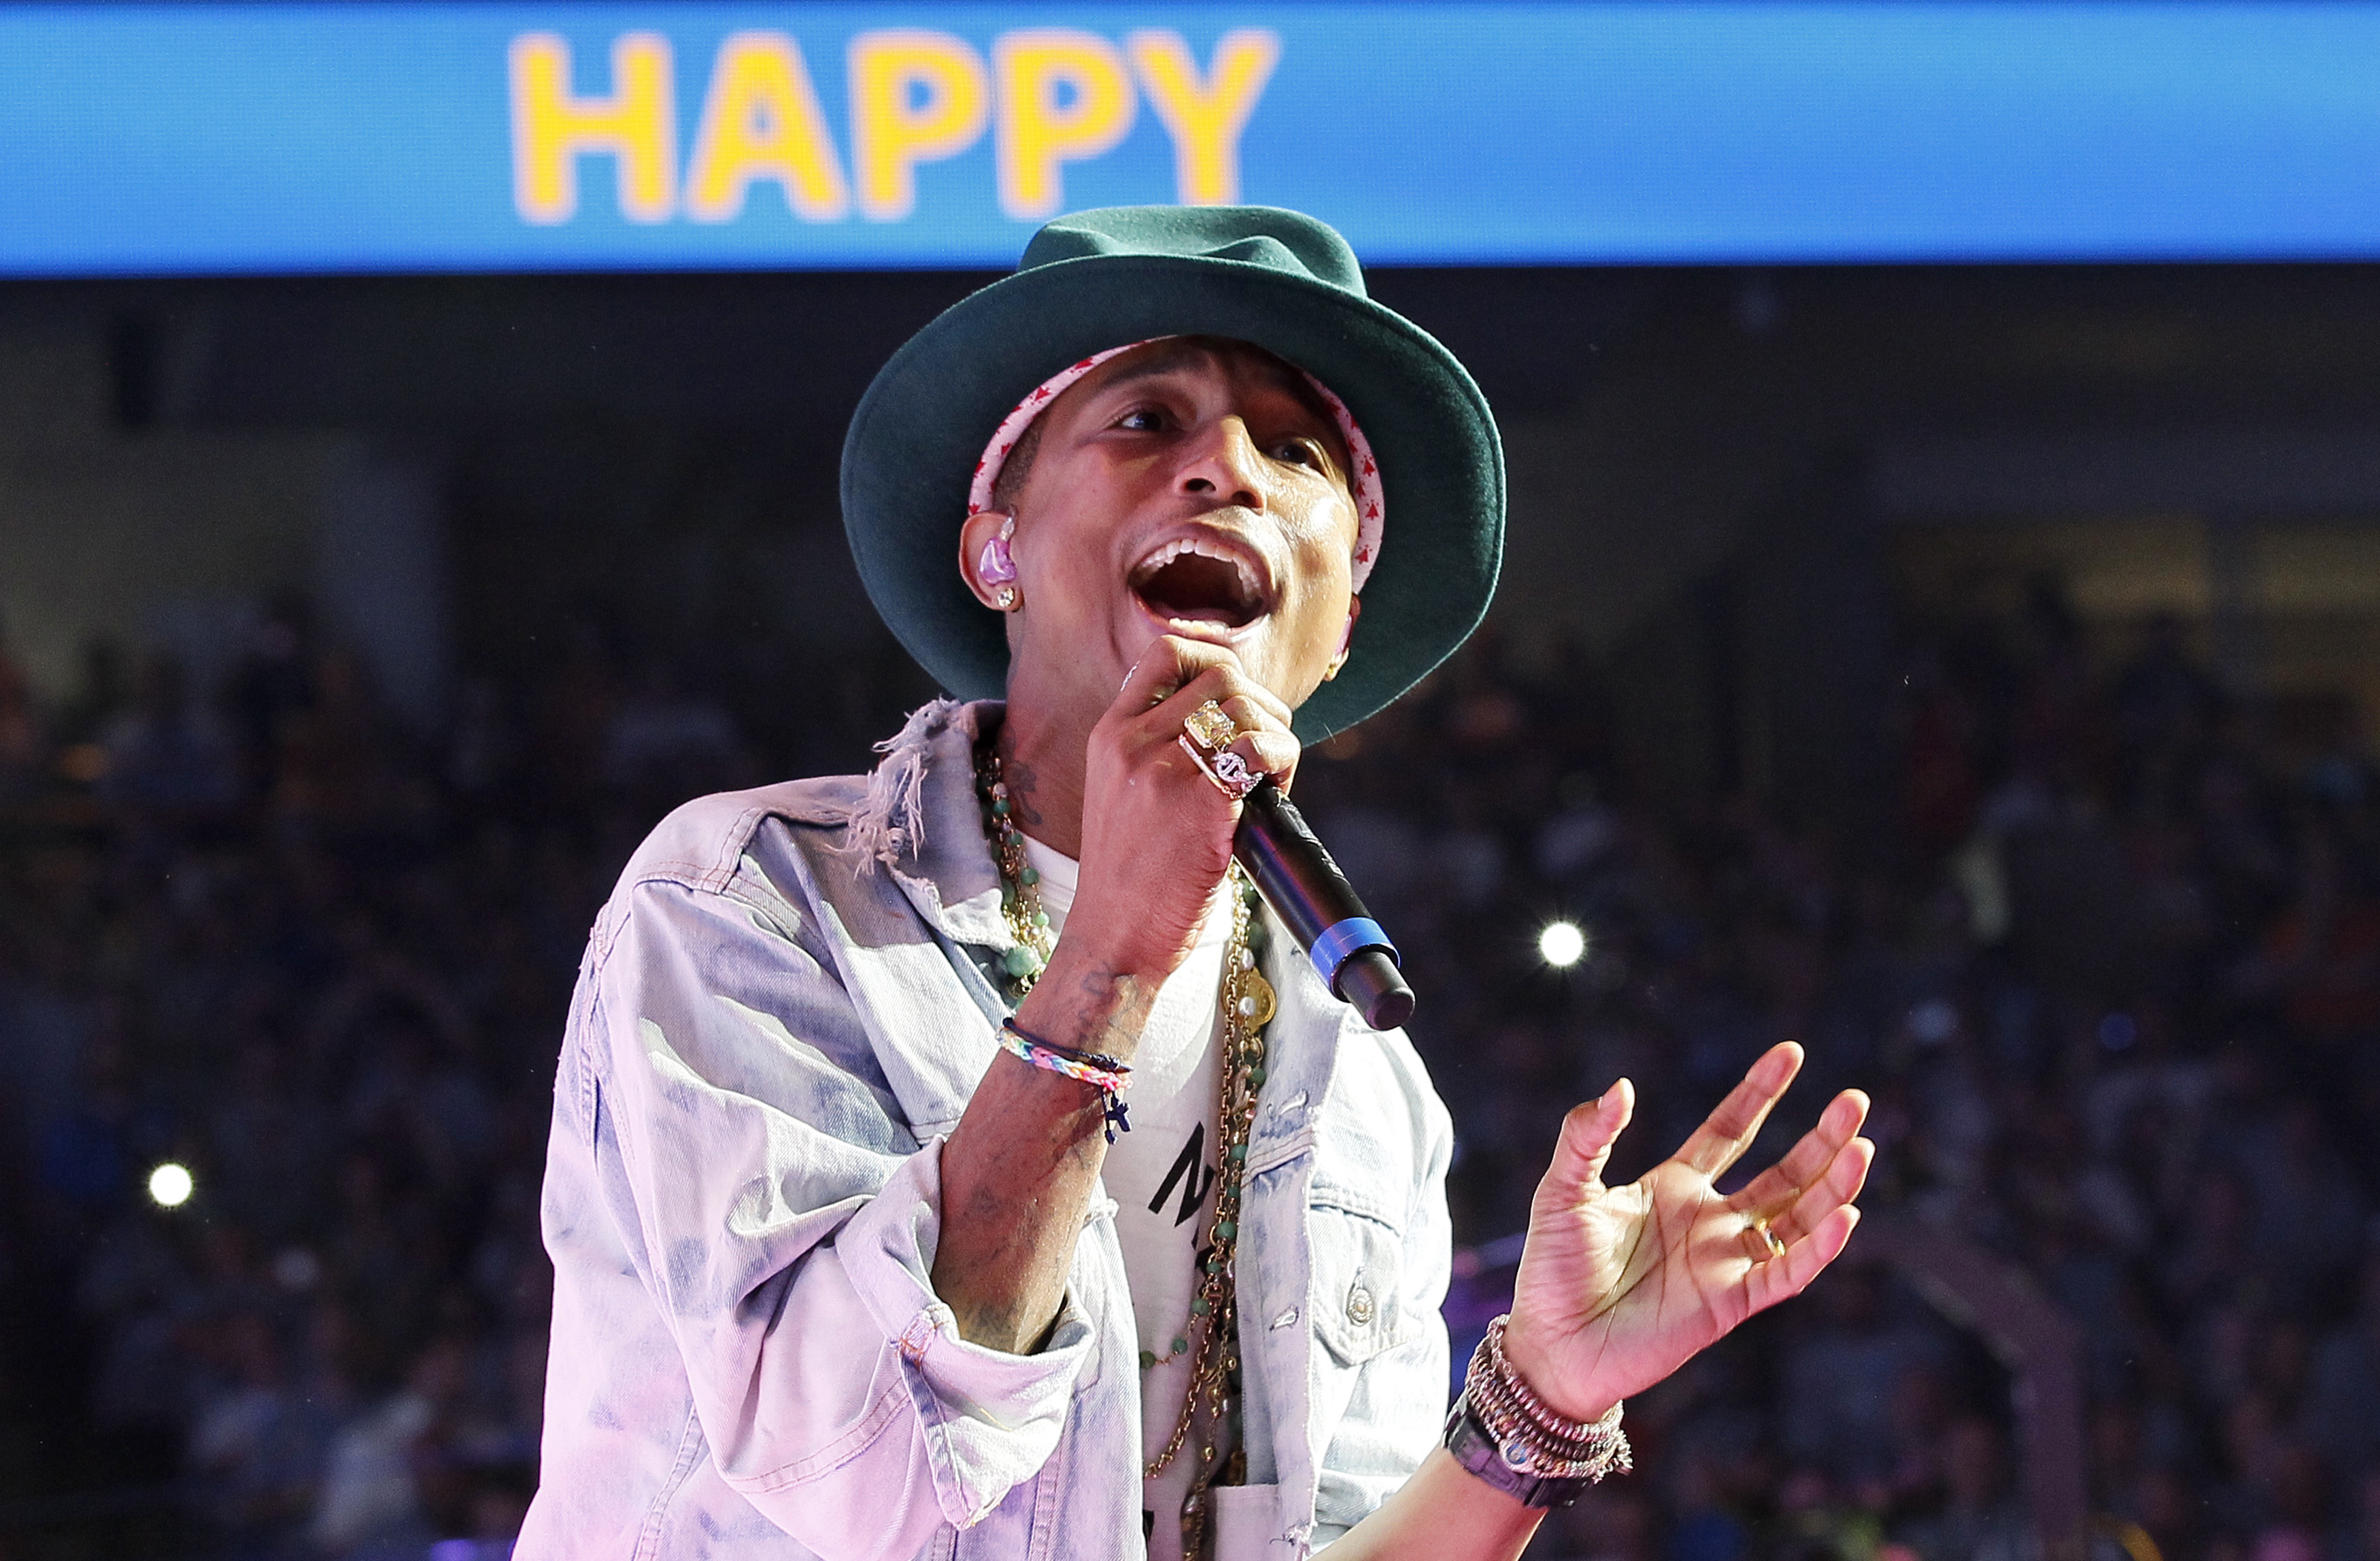 Singer Pharrell Williams performs his hit song "Happy" at the Walmart annual shareholders meeting in Fayetteville, Arkansas June 6, 2014. (Rick Wilking / Reuters&mdash;REUTERS)